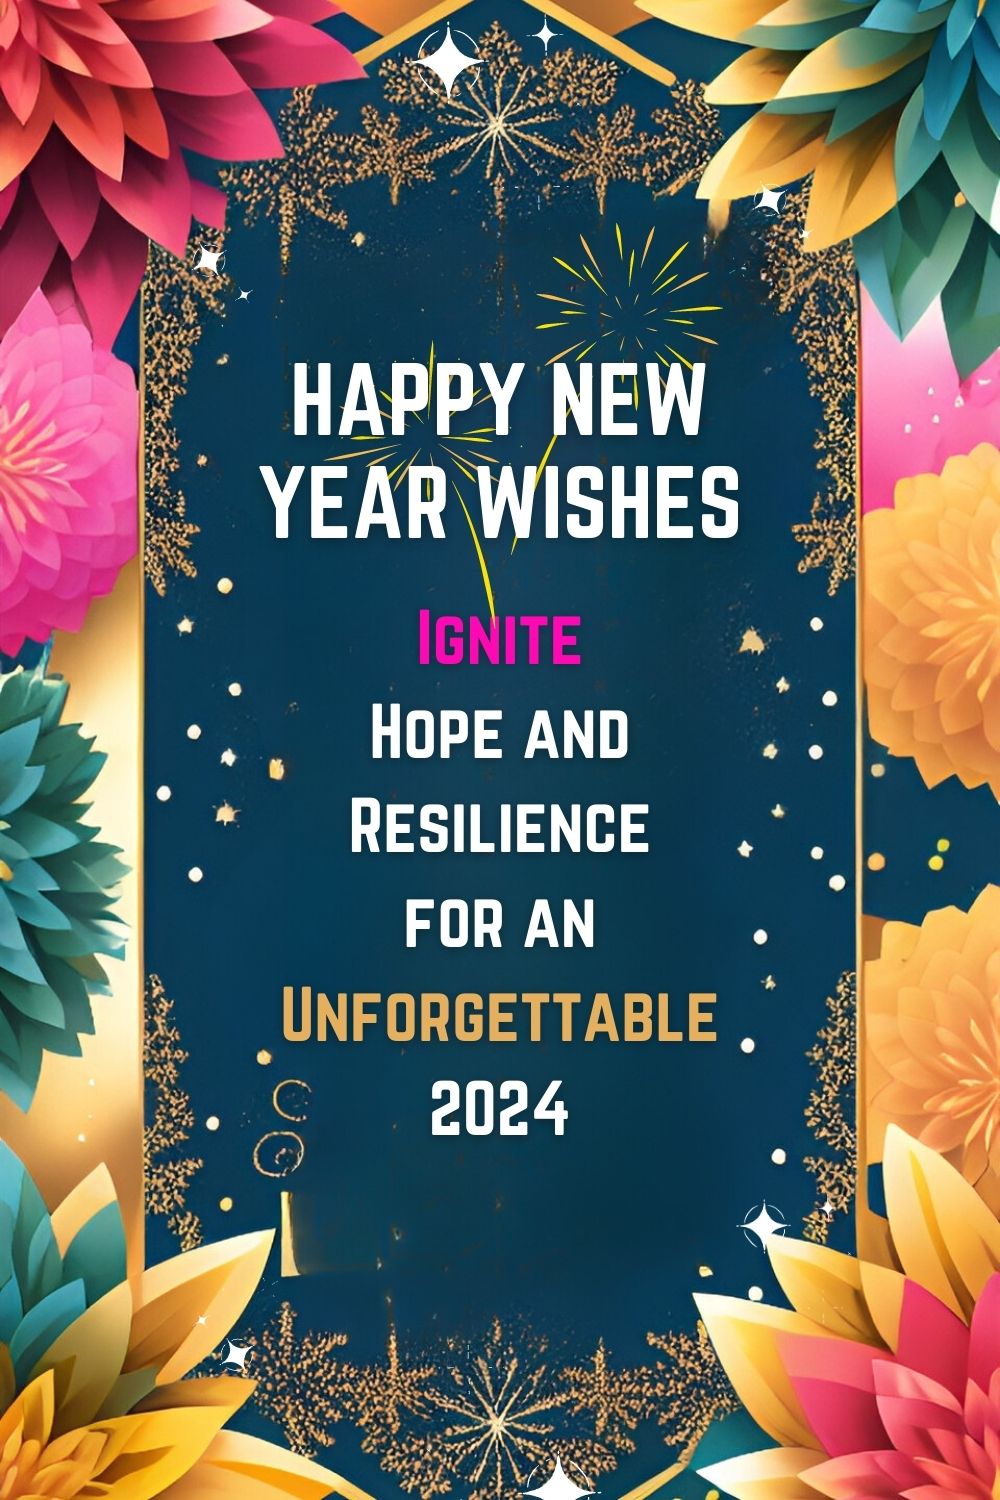 Happy New Year Wishes: Ignite Hope and Resilience for 2024